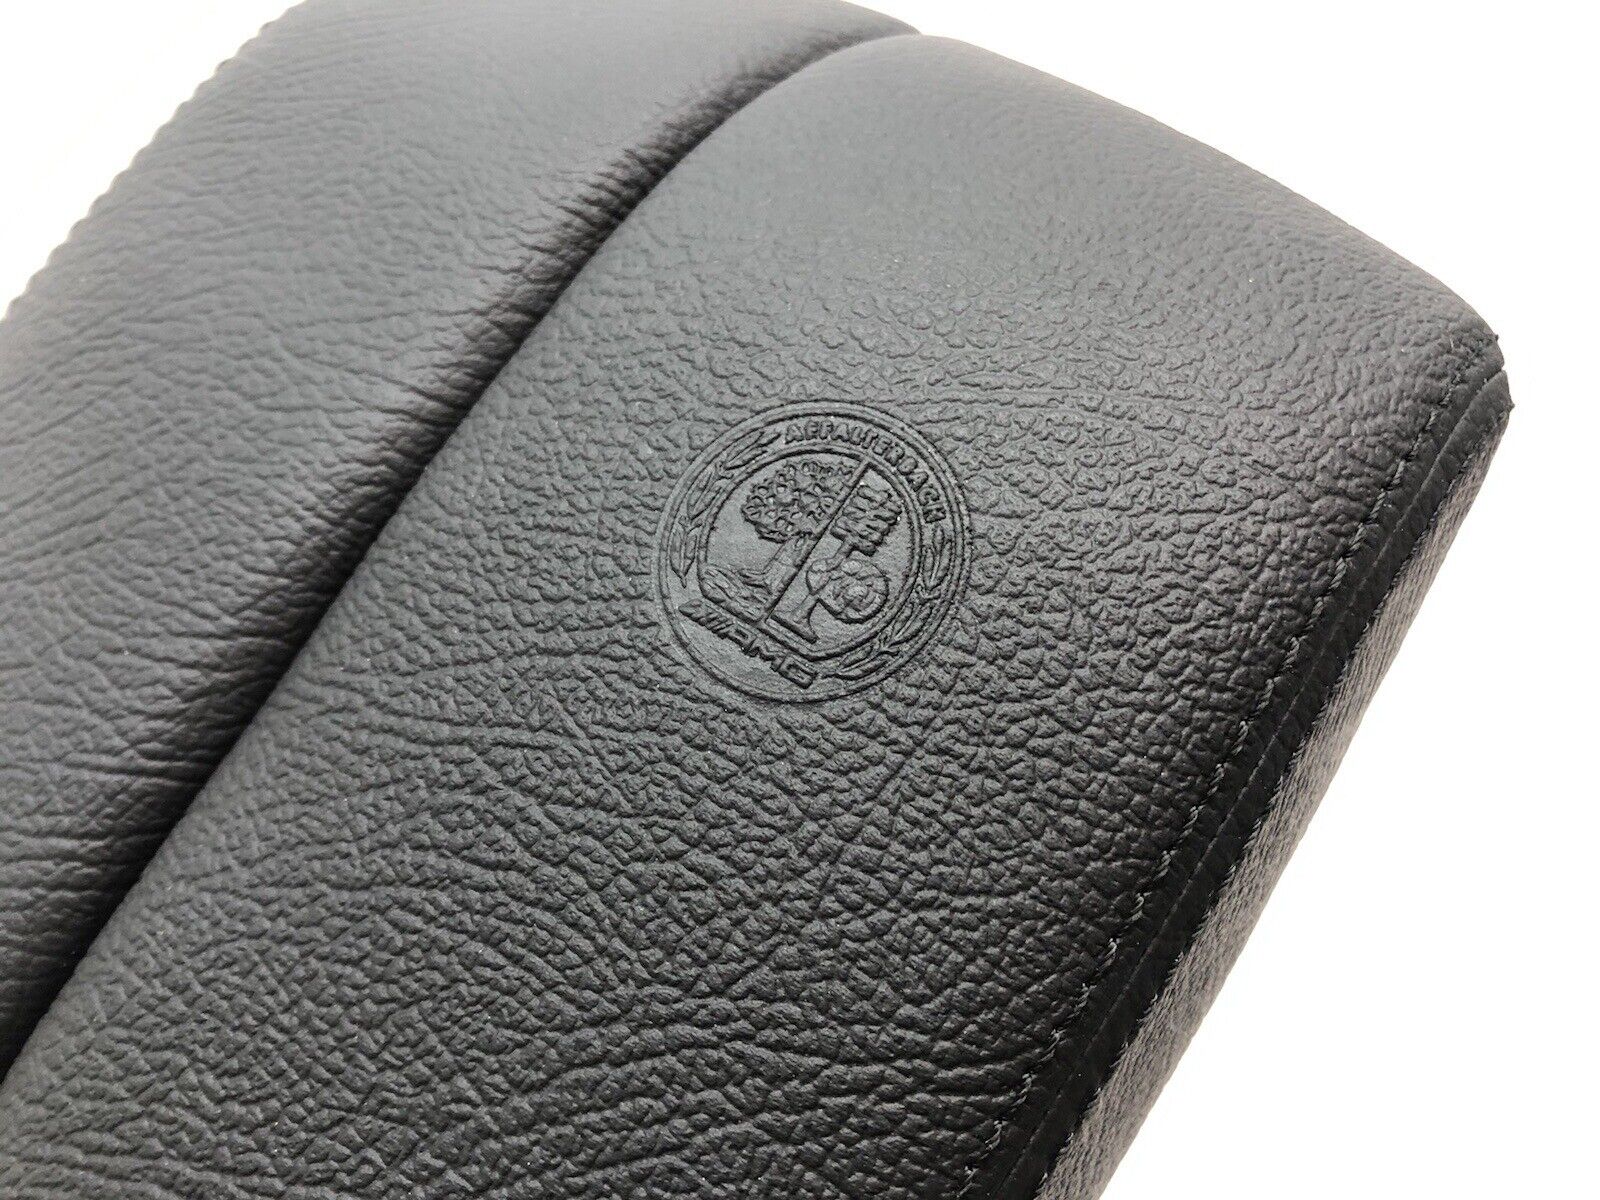 2000-2005 MERCEDES S CLASS W220 S55 AMG S65 S500 LEATHER ARMREST CREST NAPPA